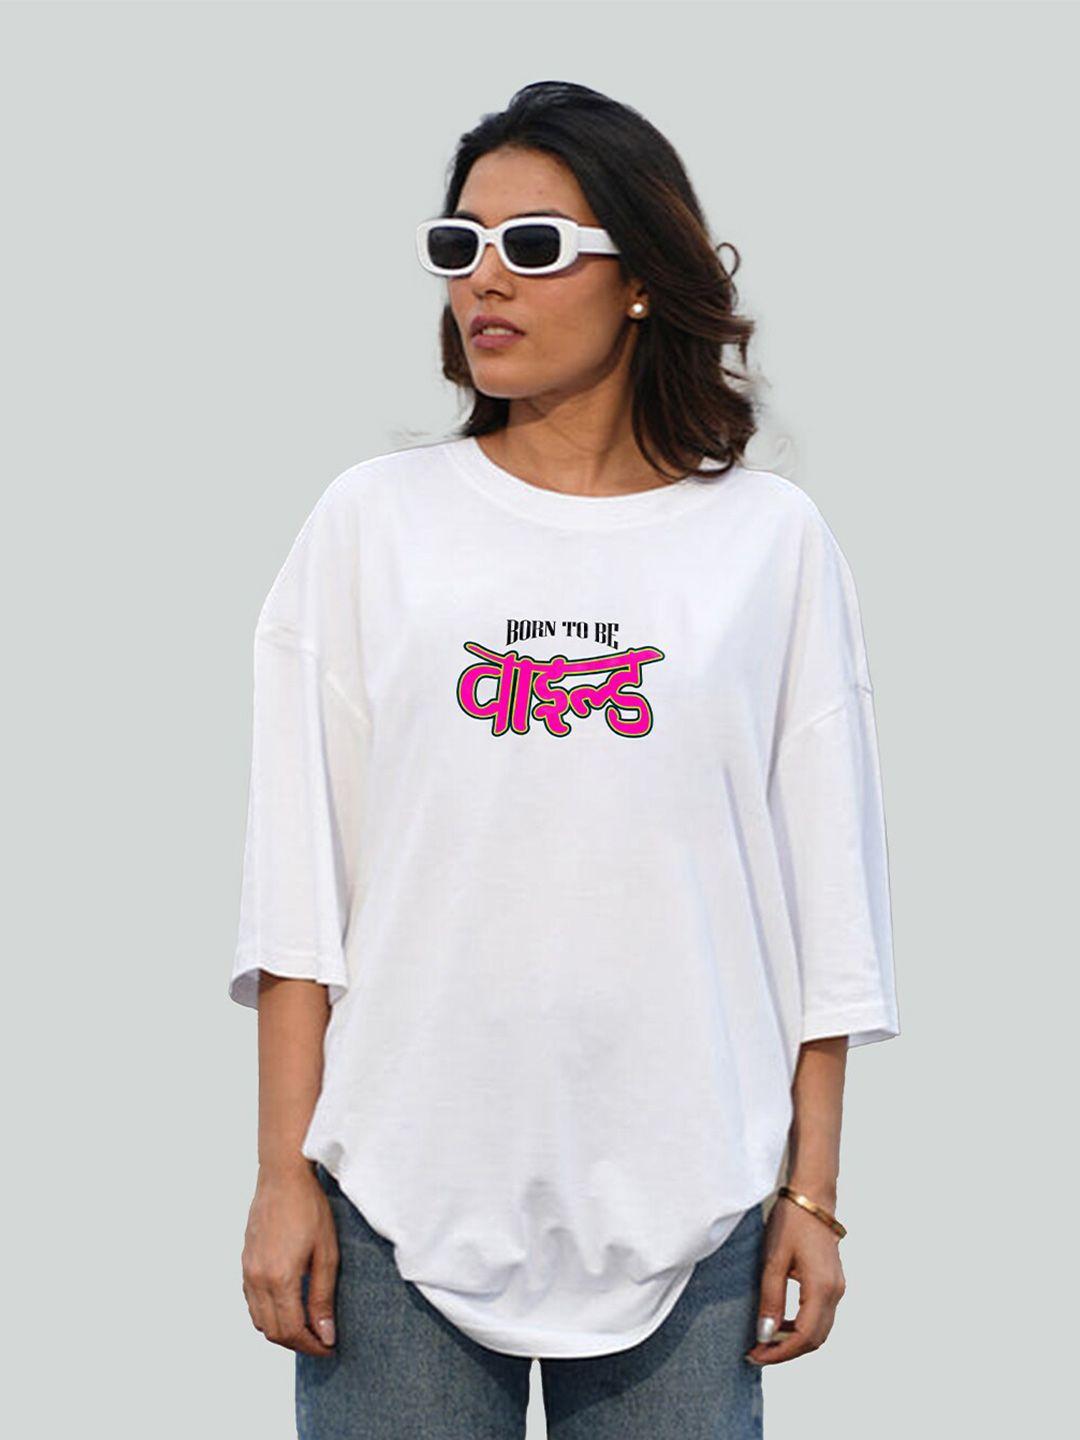 bloopers store women white printed hooded extended sleeves applique t-shirt